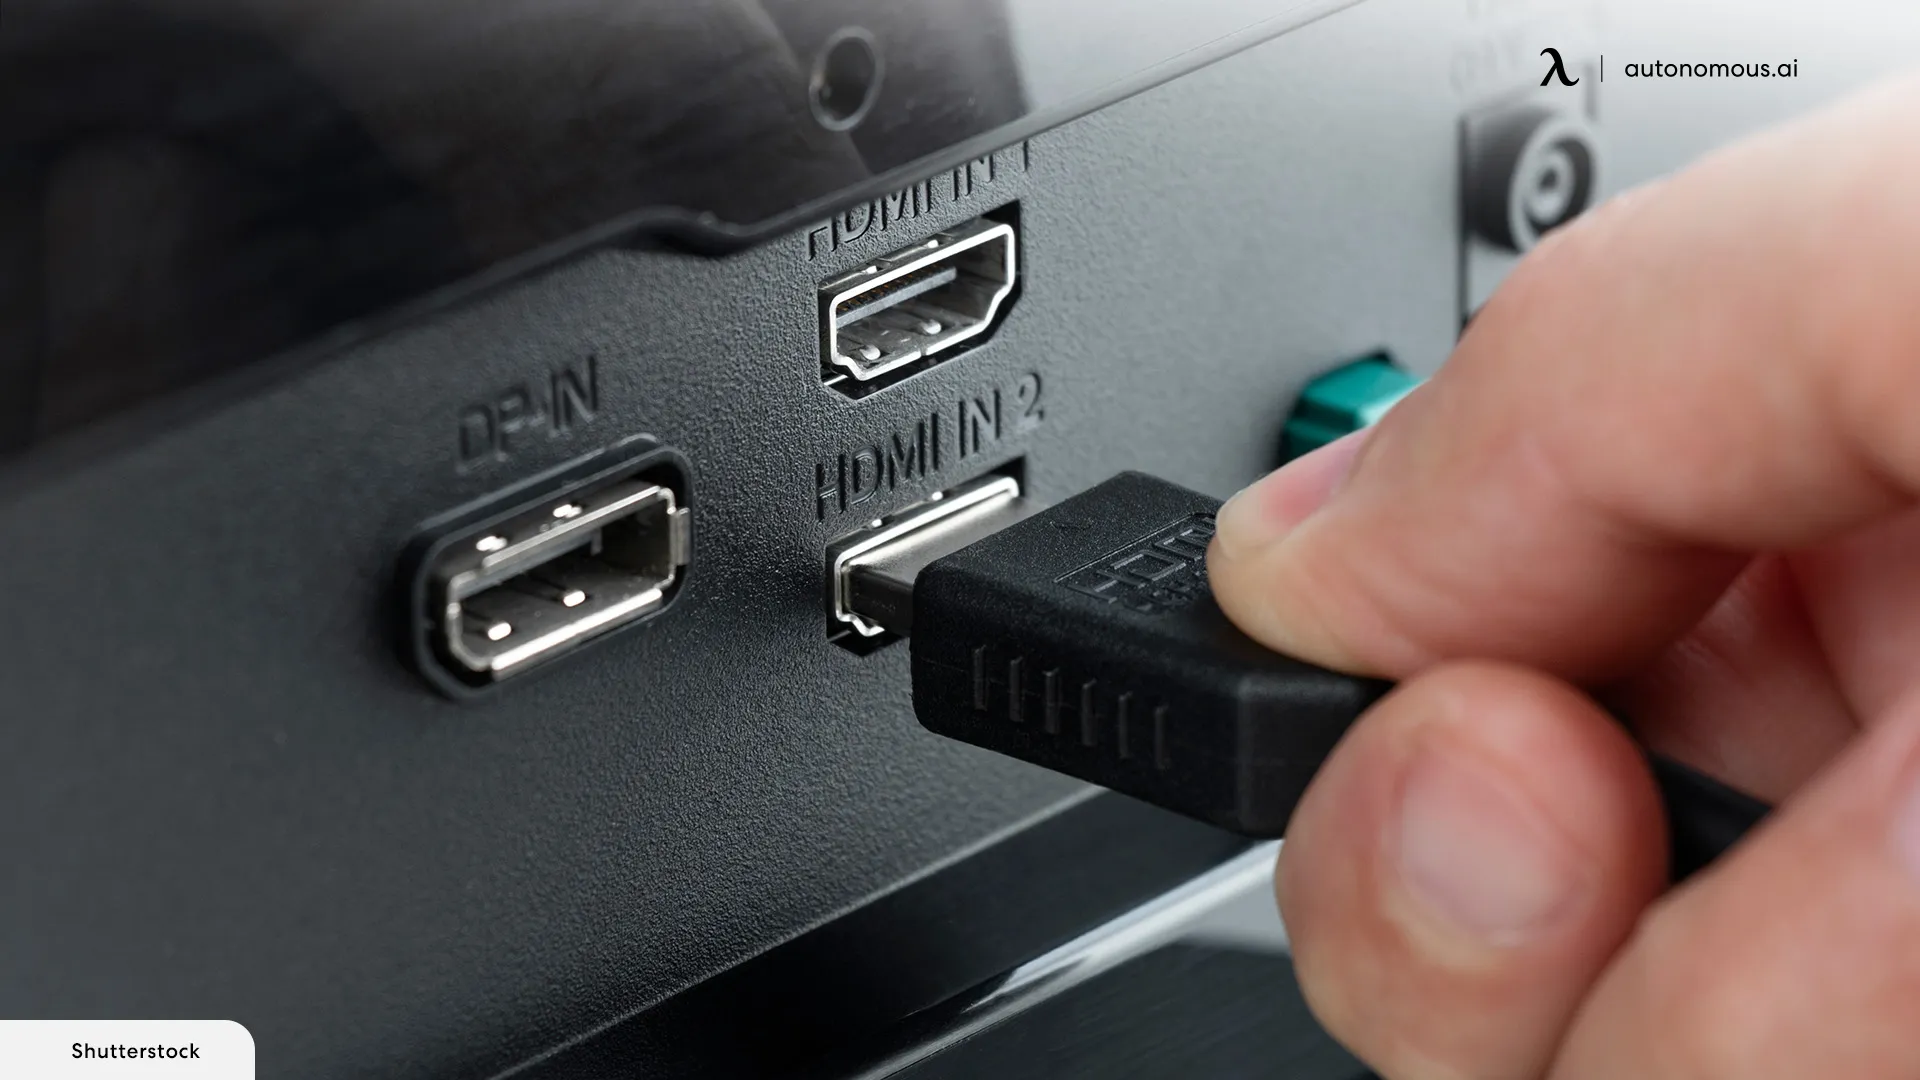 Step 4: Connect the HDMI Cable to Your TV